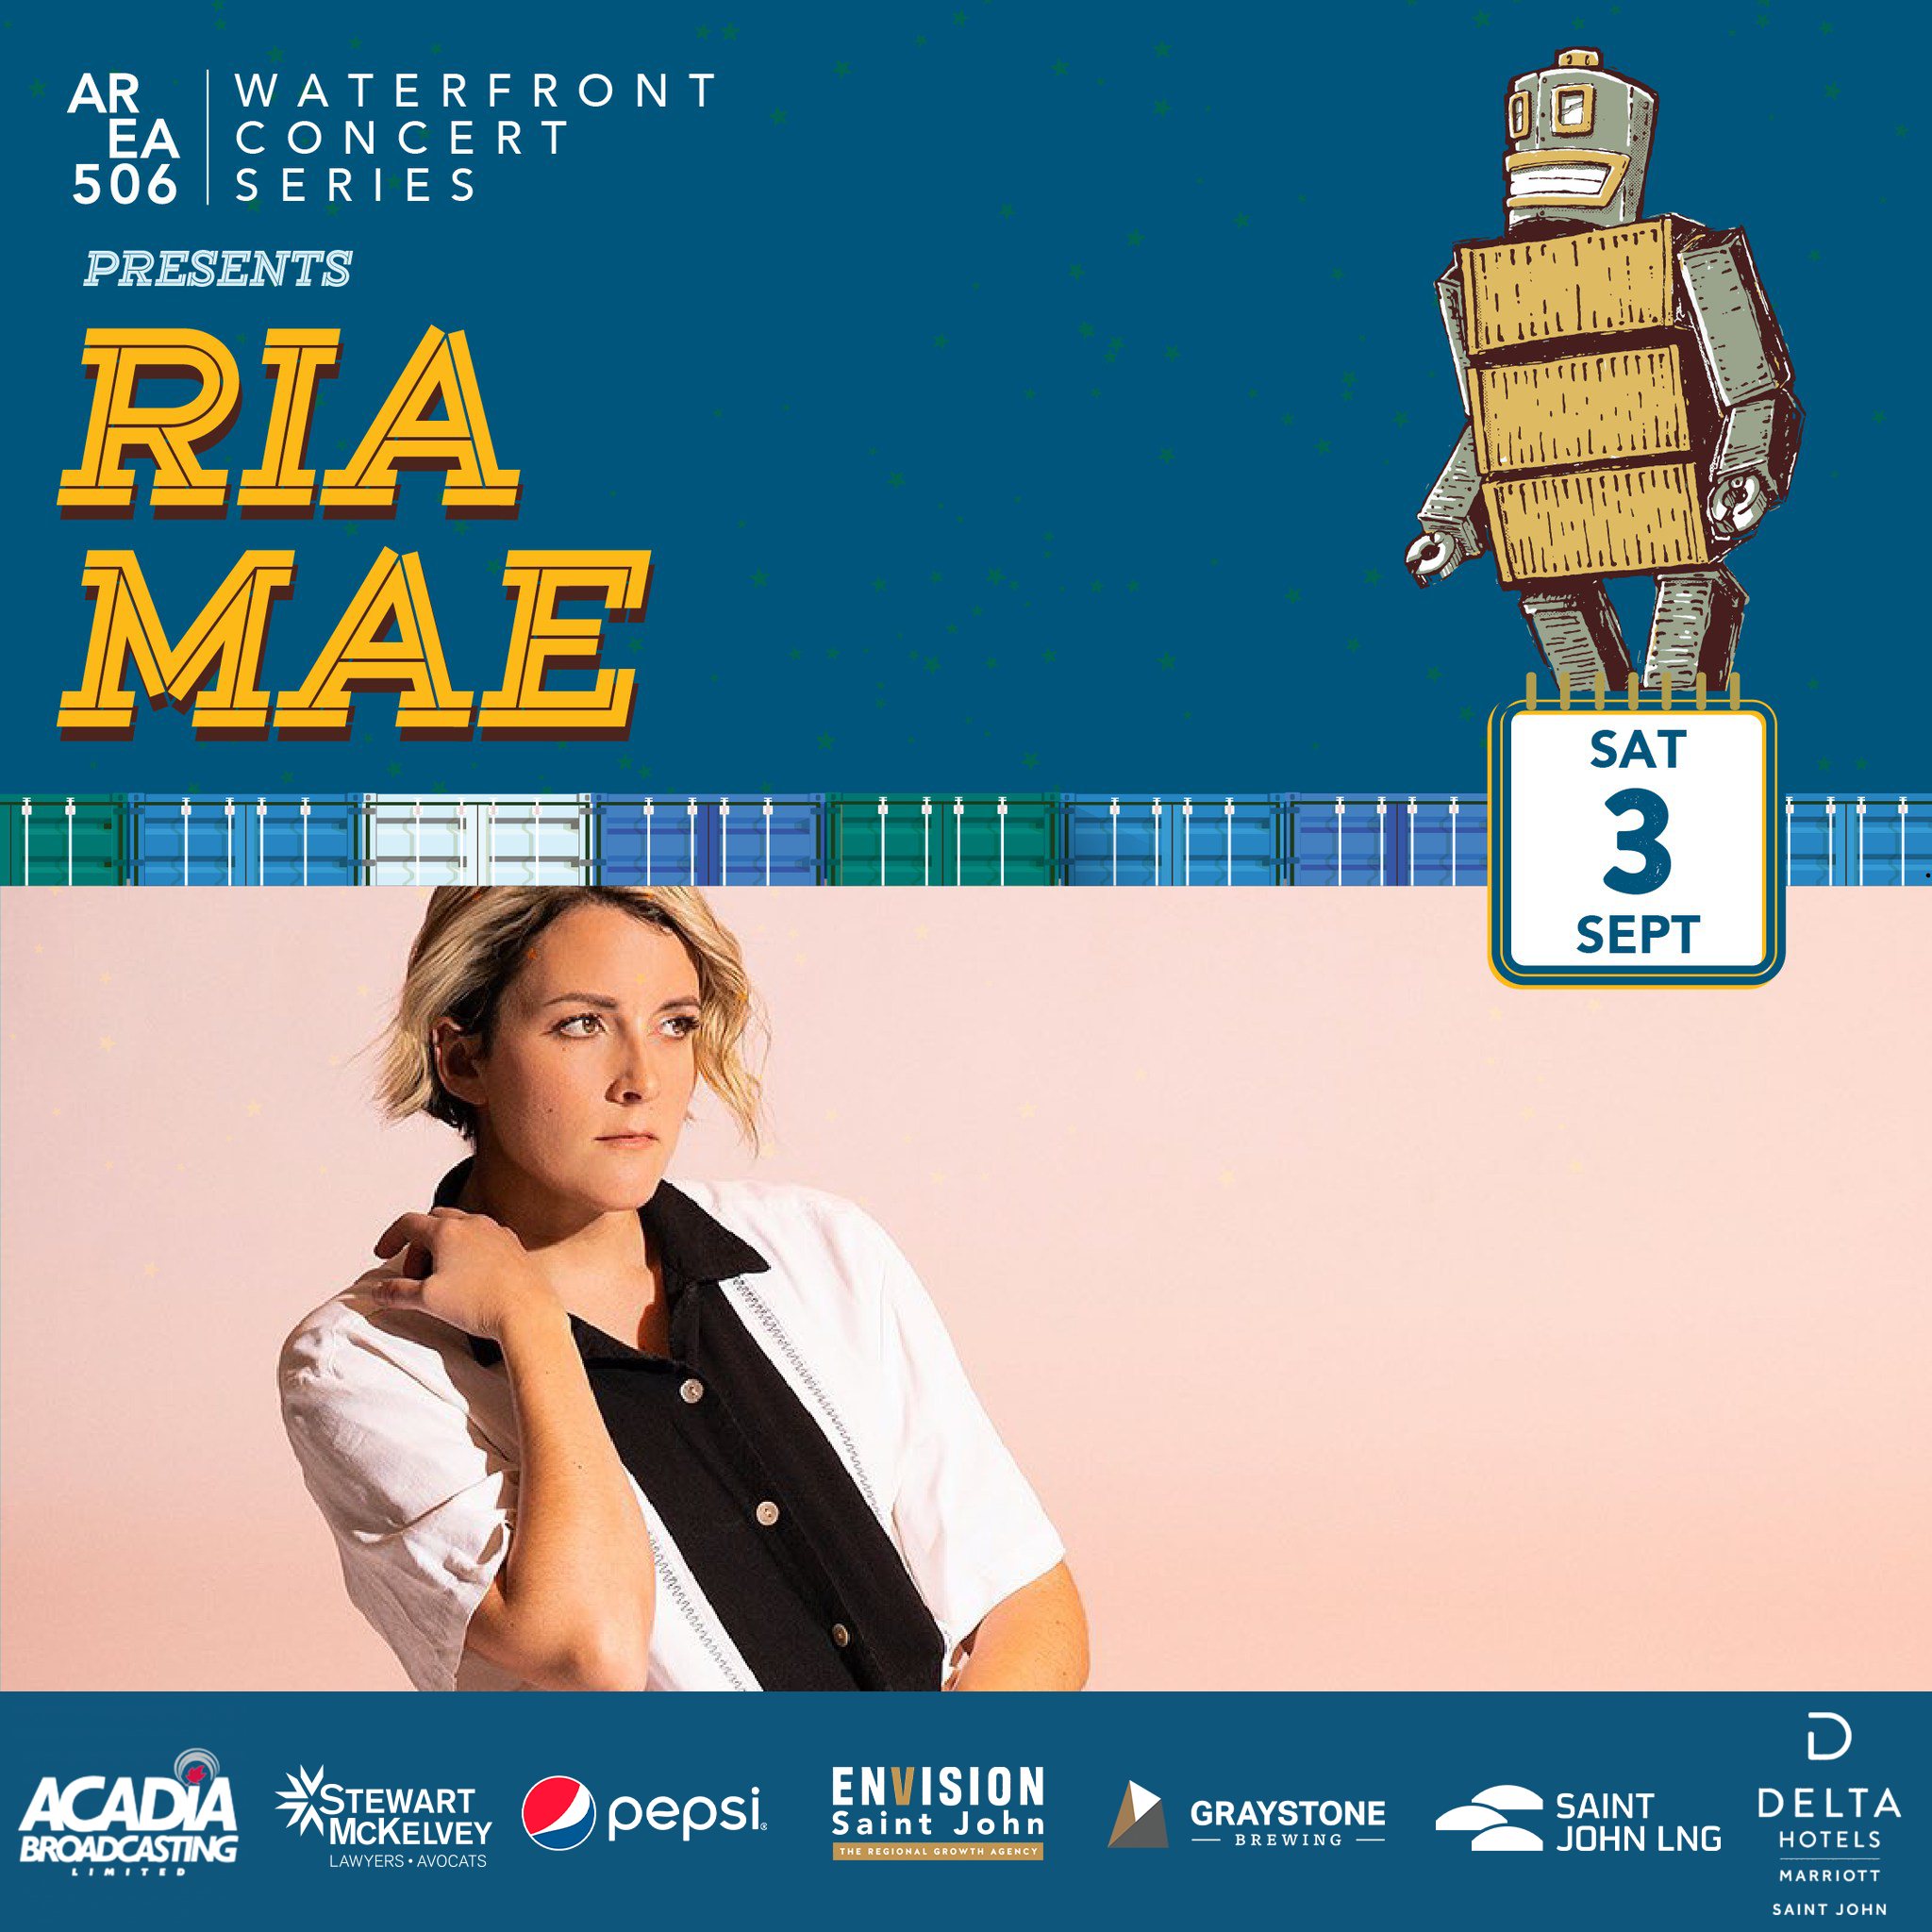 Area 506 Waterfront Concert Series presents Ria Mae. Saturday, 3 September.